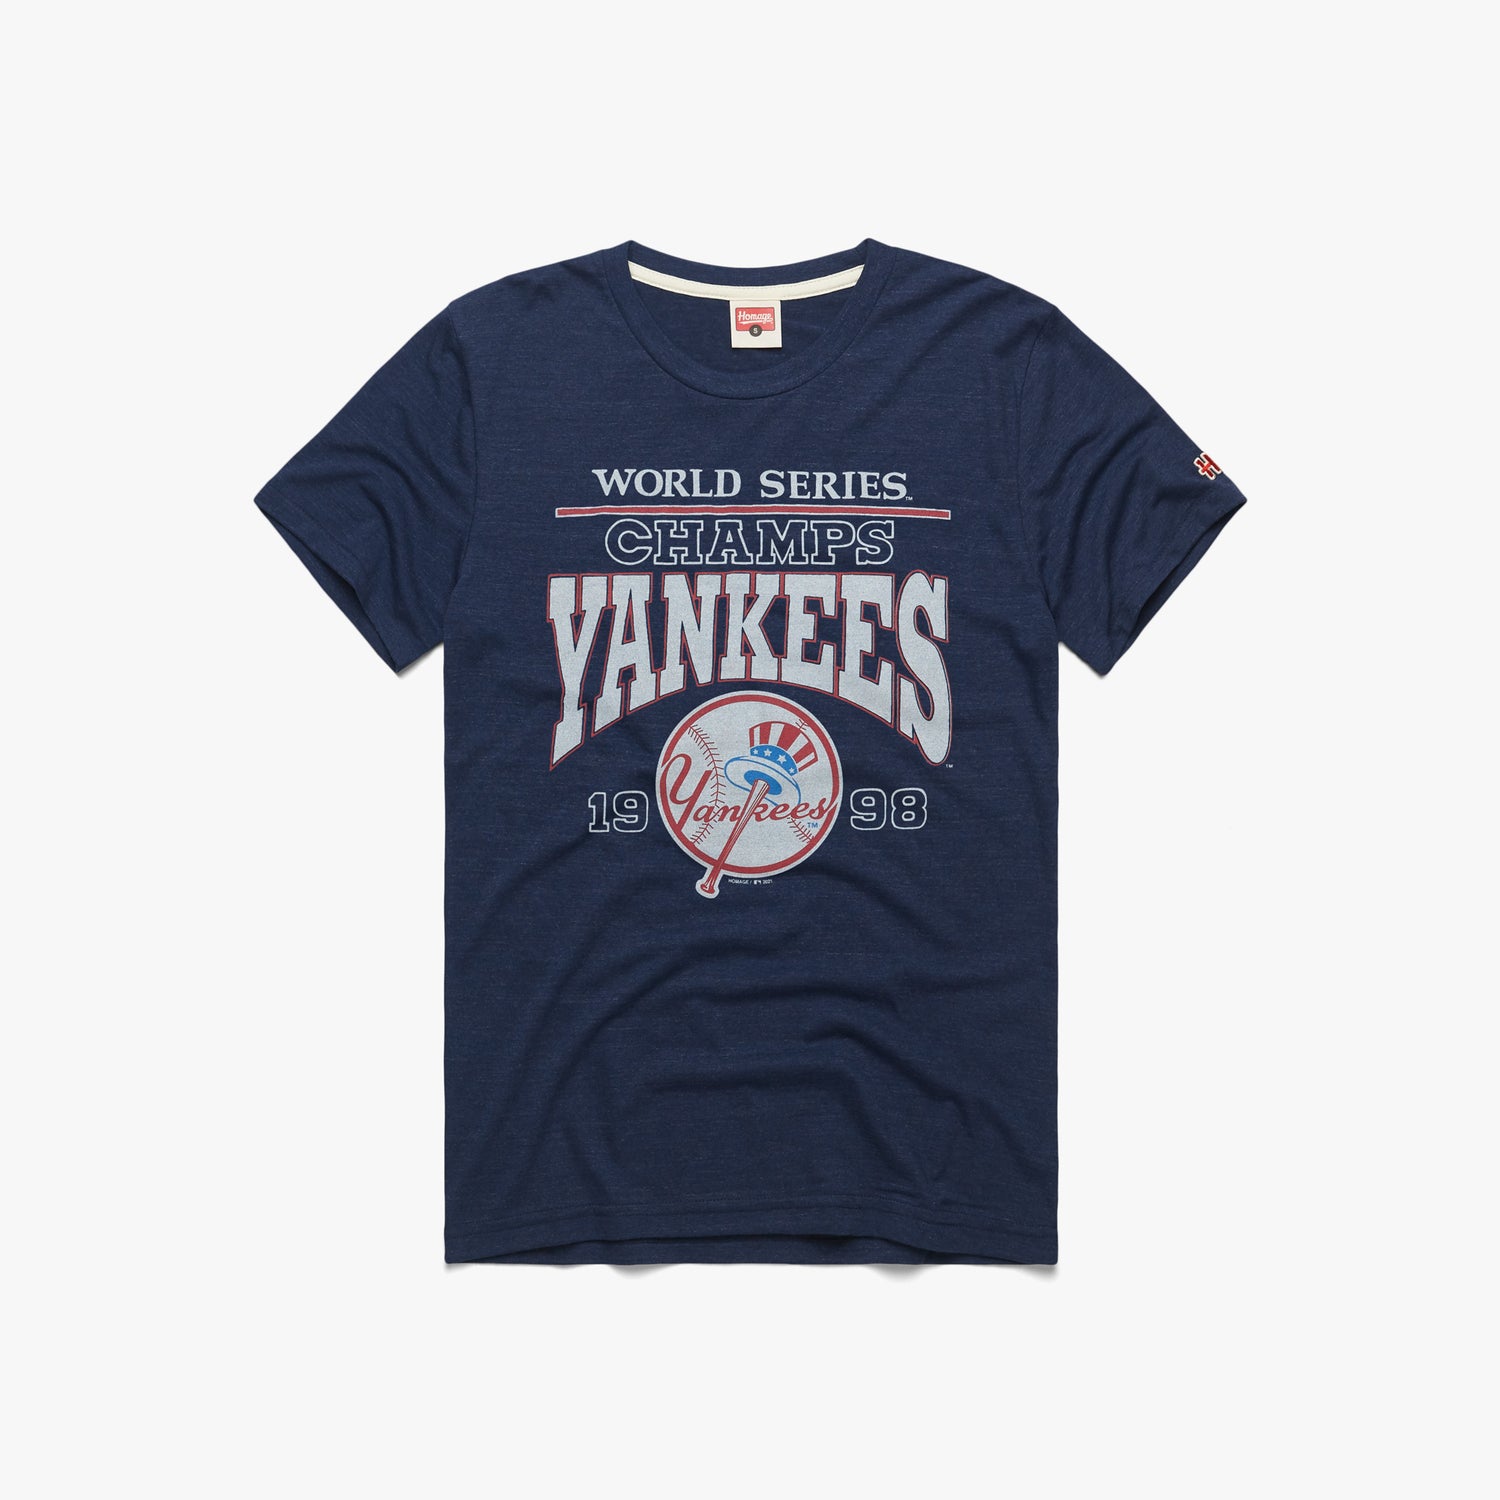 1998 New York Yankees Champs Shirt — Nothing New